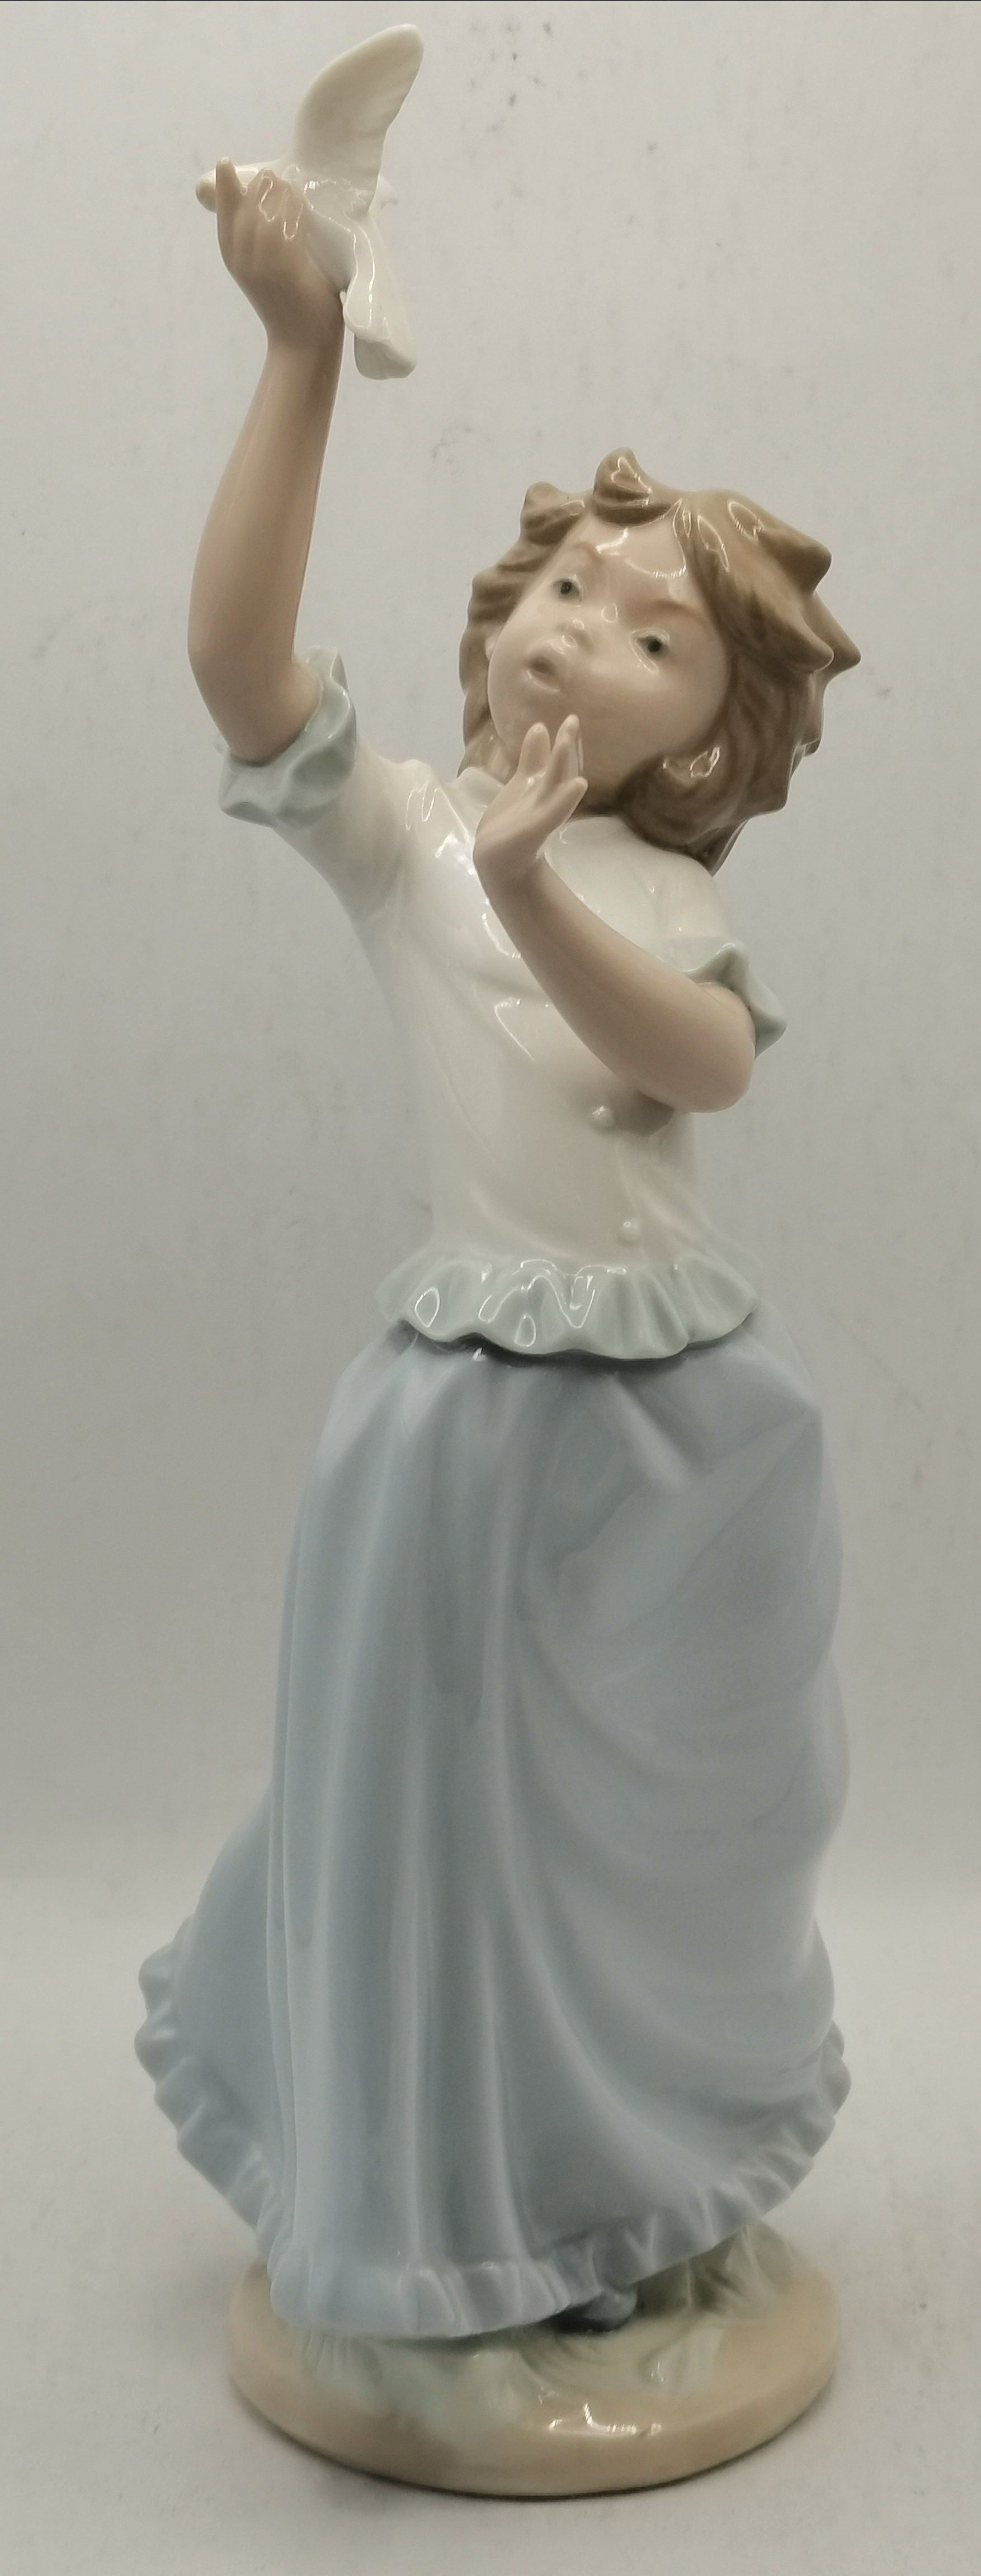 4 x Nao/ Lladro figures plus a Yardley soap dish - Image 8 of 12